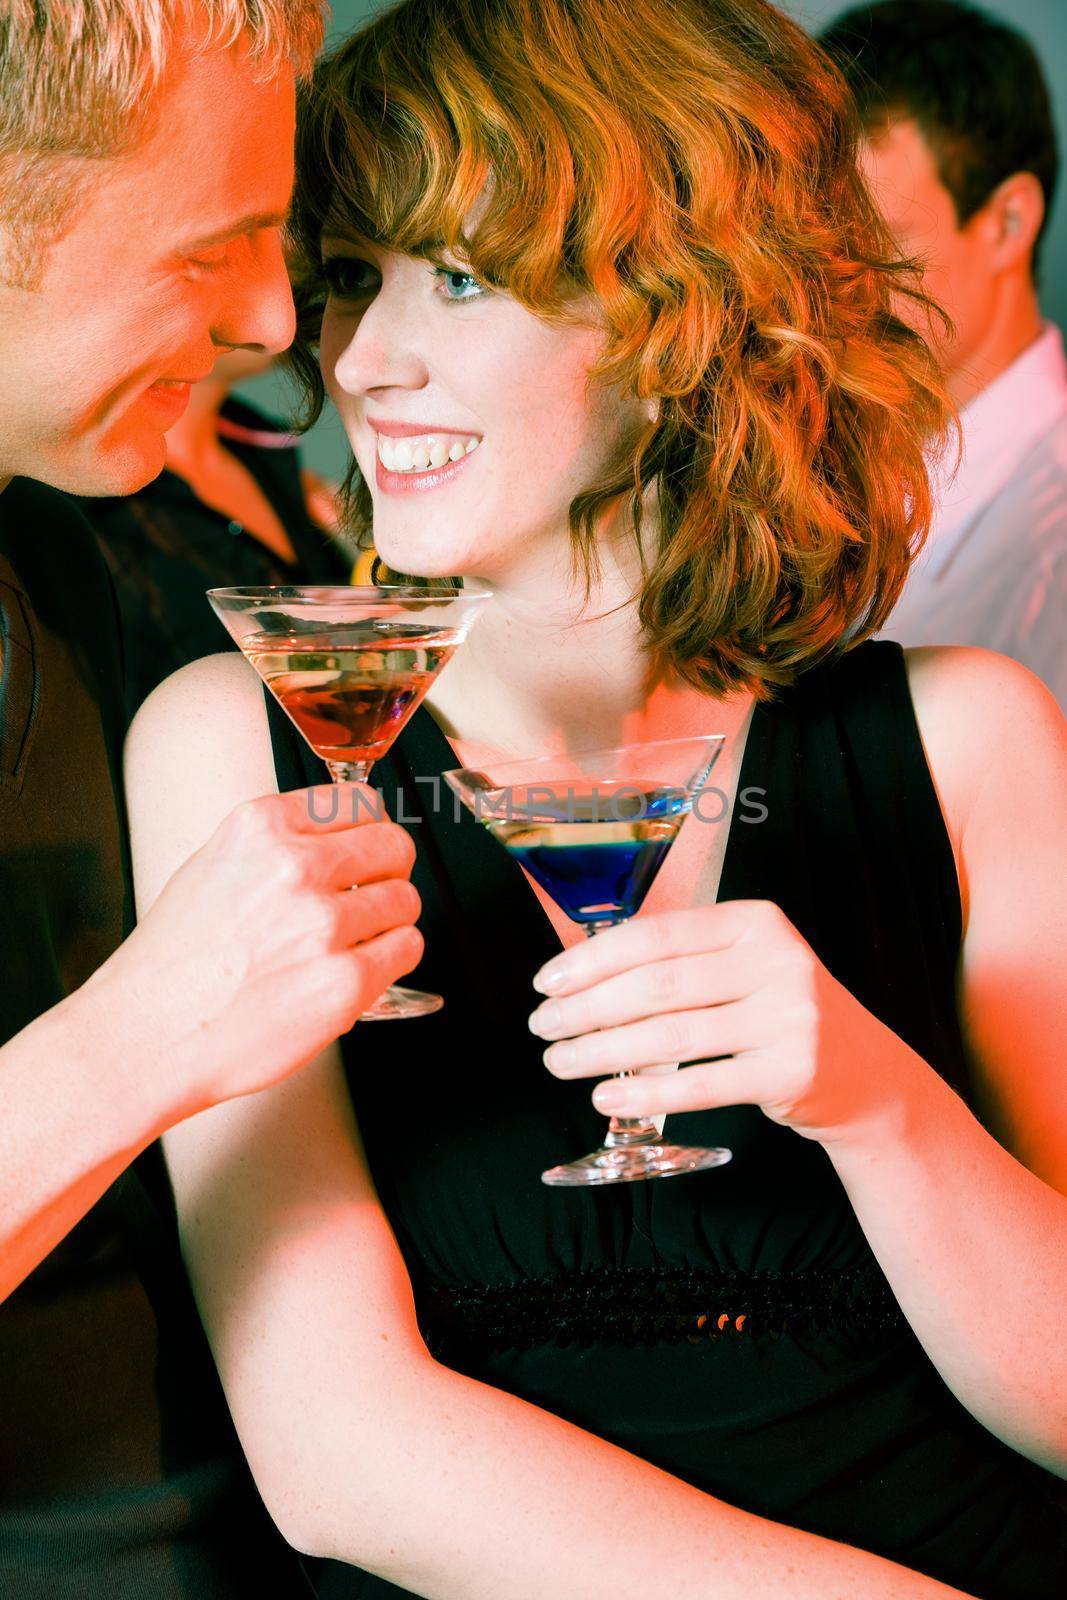 Couple flirting very obviously in a bar or at a club, cocktail drinks in front of them